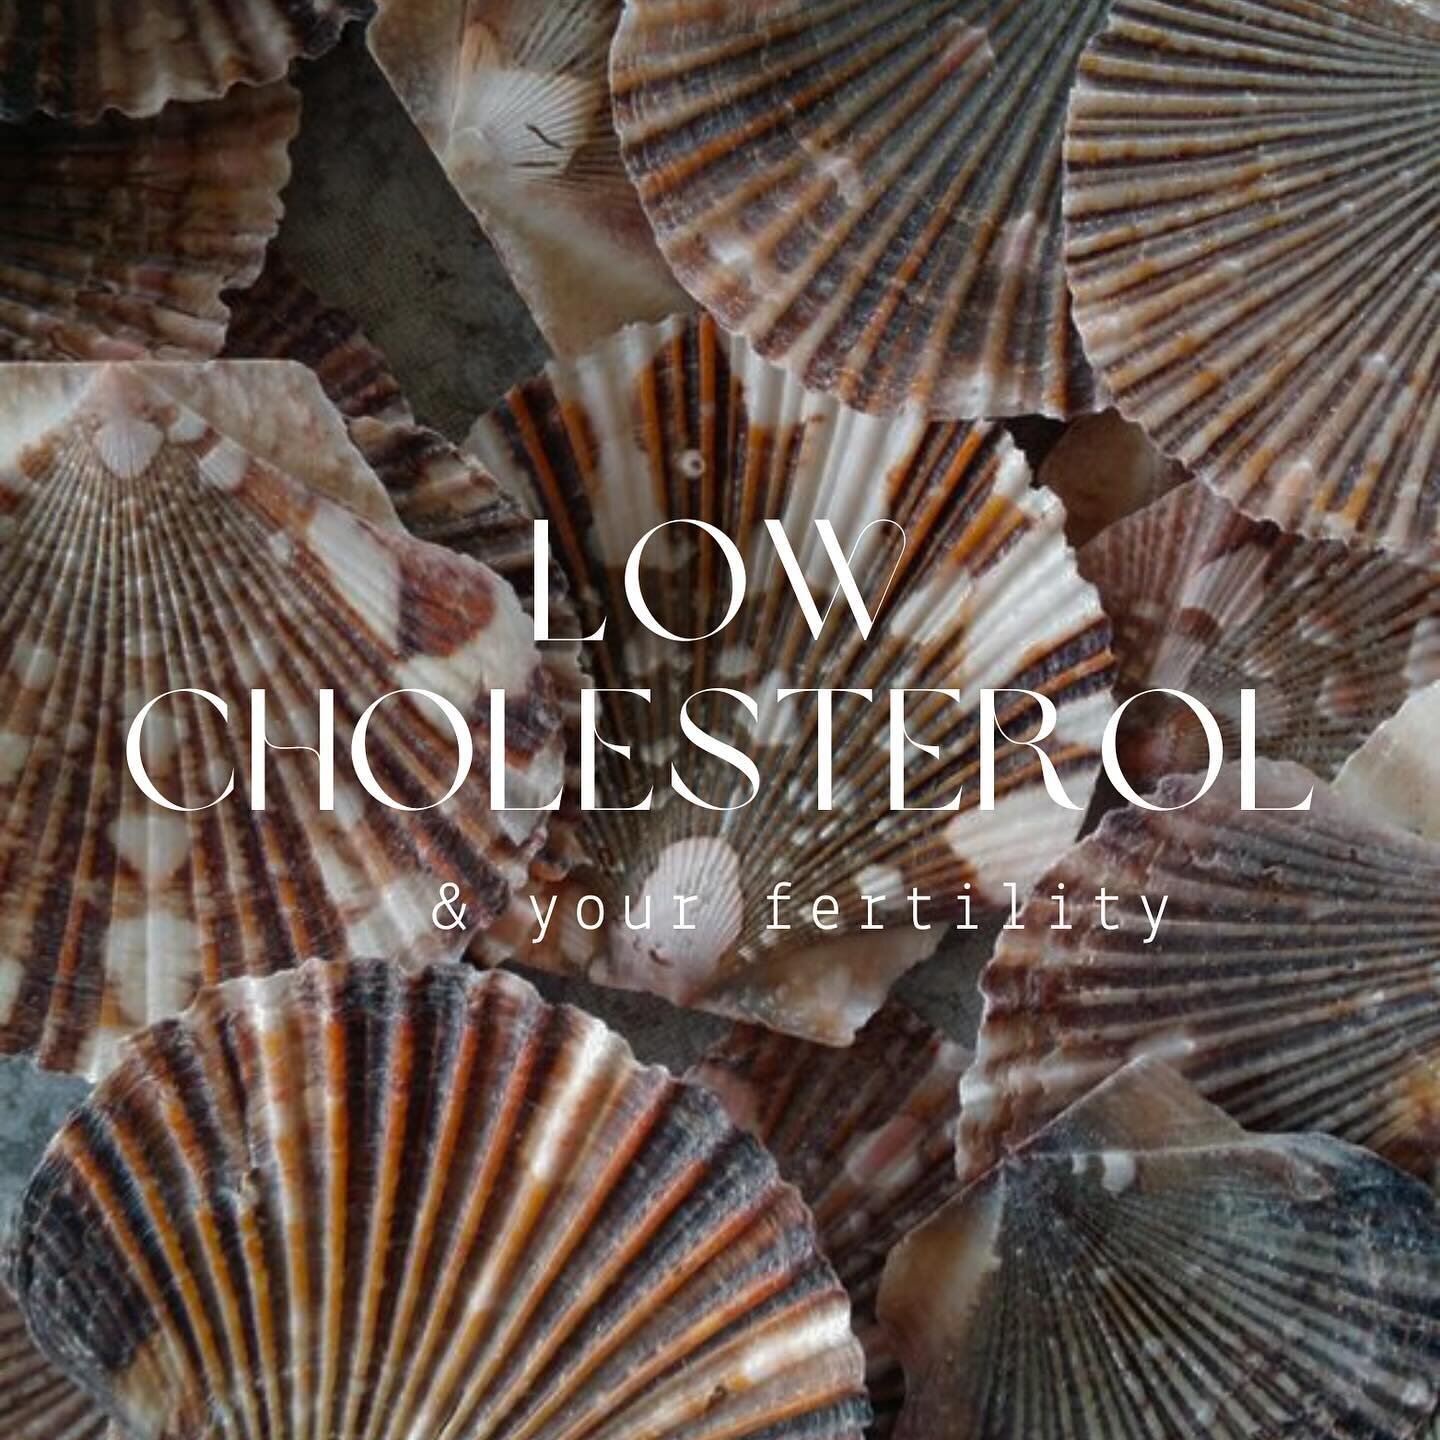 Cholesterol gets a bad name but when talking hormones and fertility it is vital!!!
💯
In fact cholesterol is the major building block for our steroidal hormones such as testosterone, estrogen and progesterone.

Unfortunately when we visit the GP they